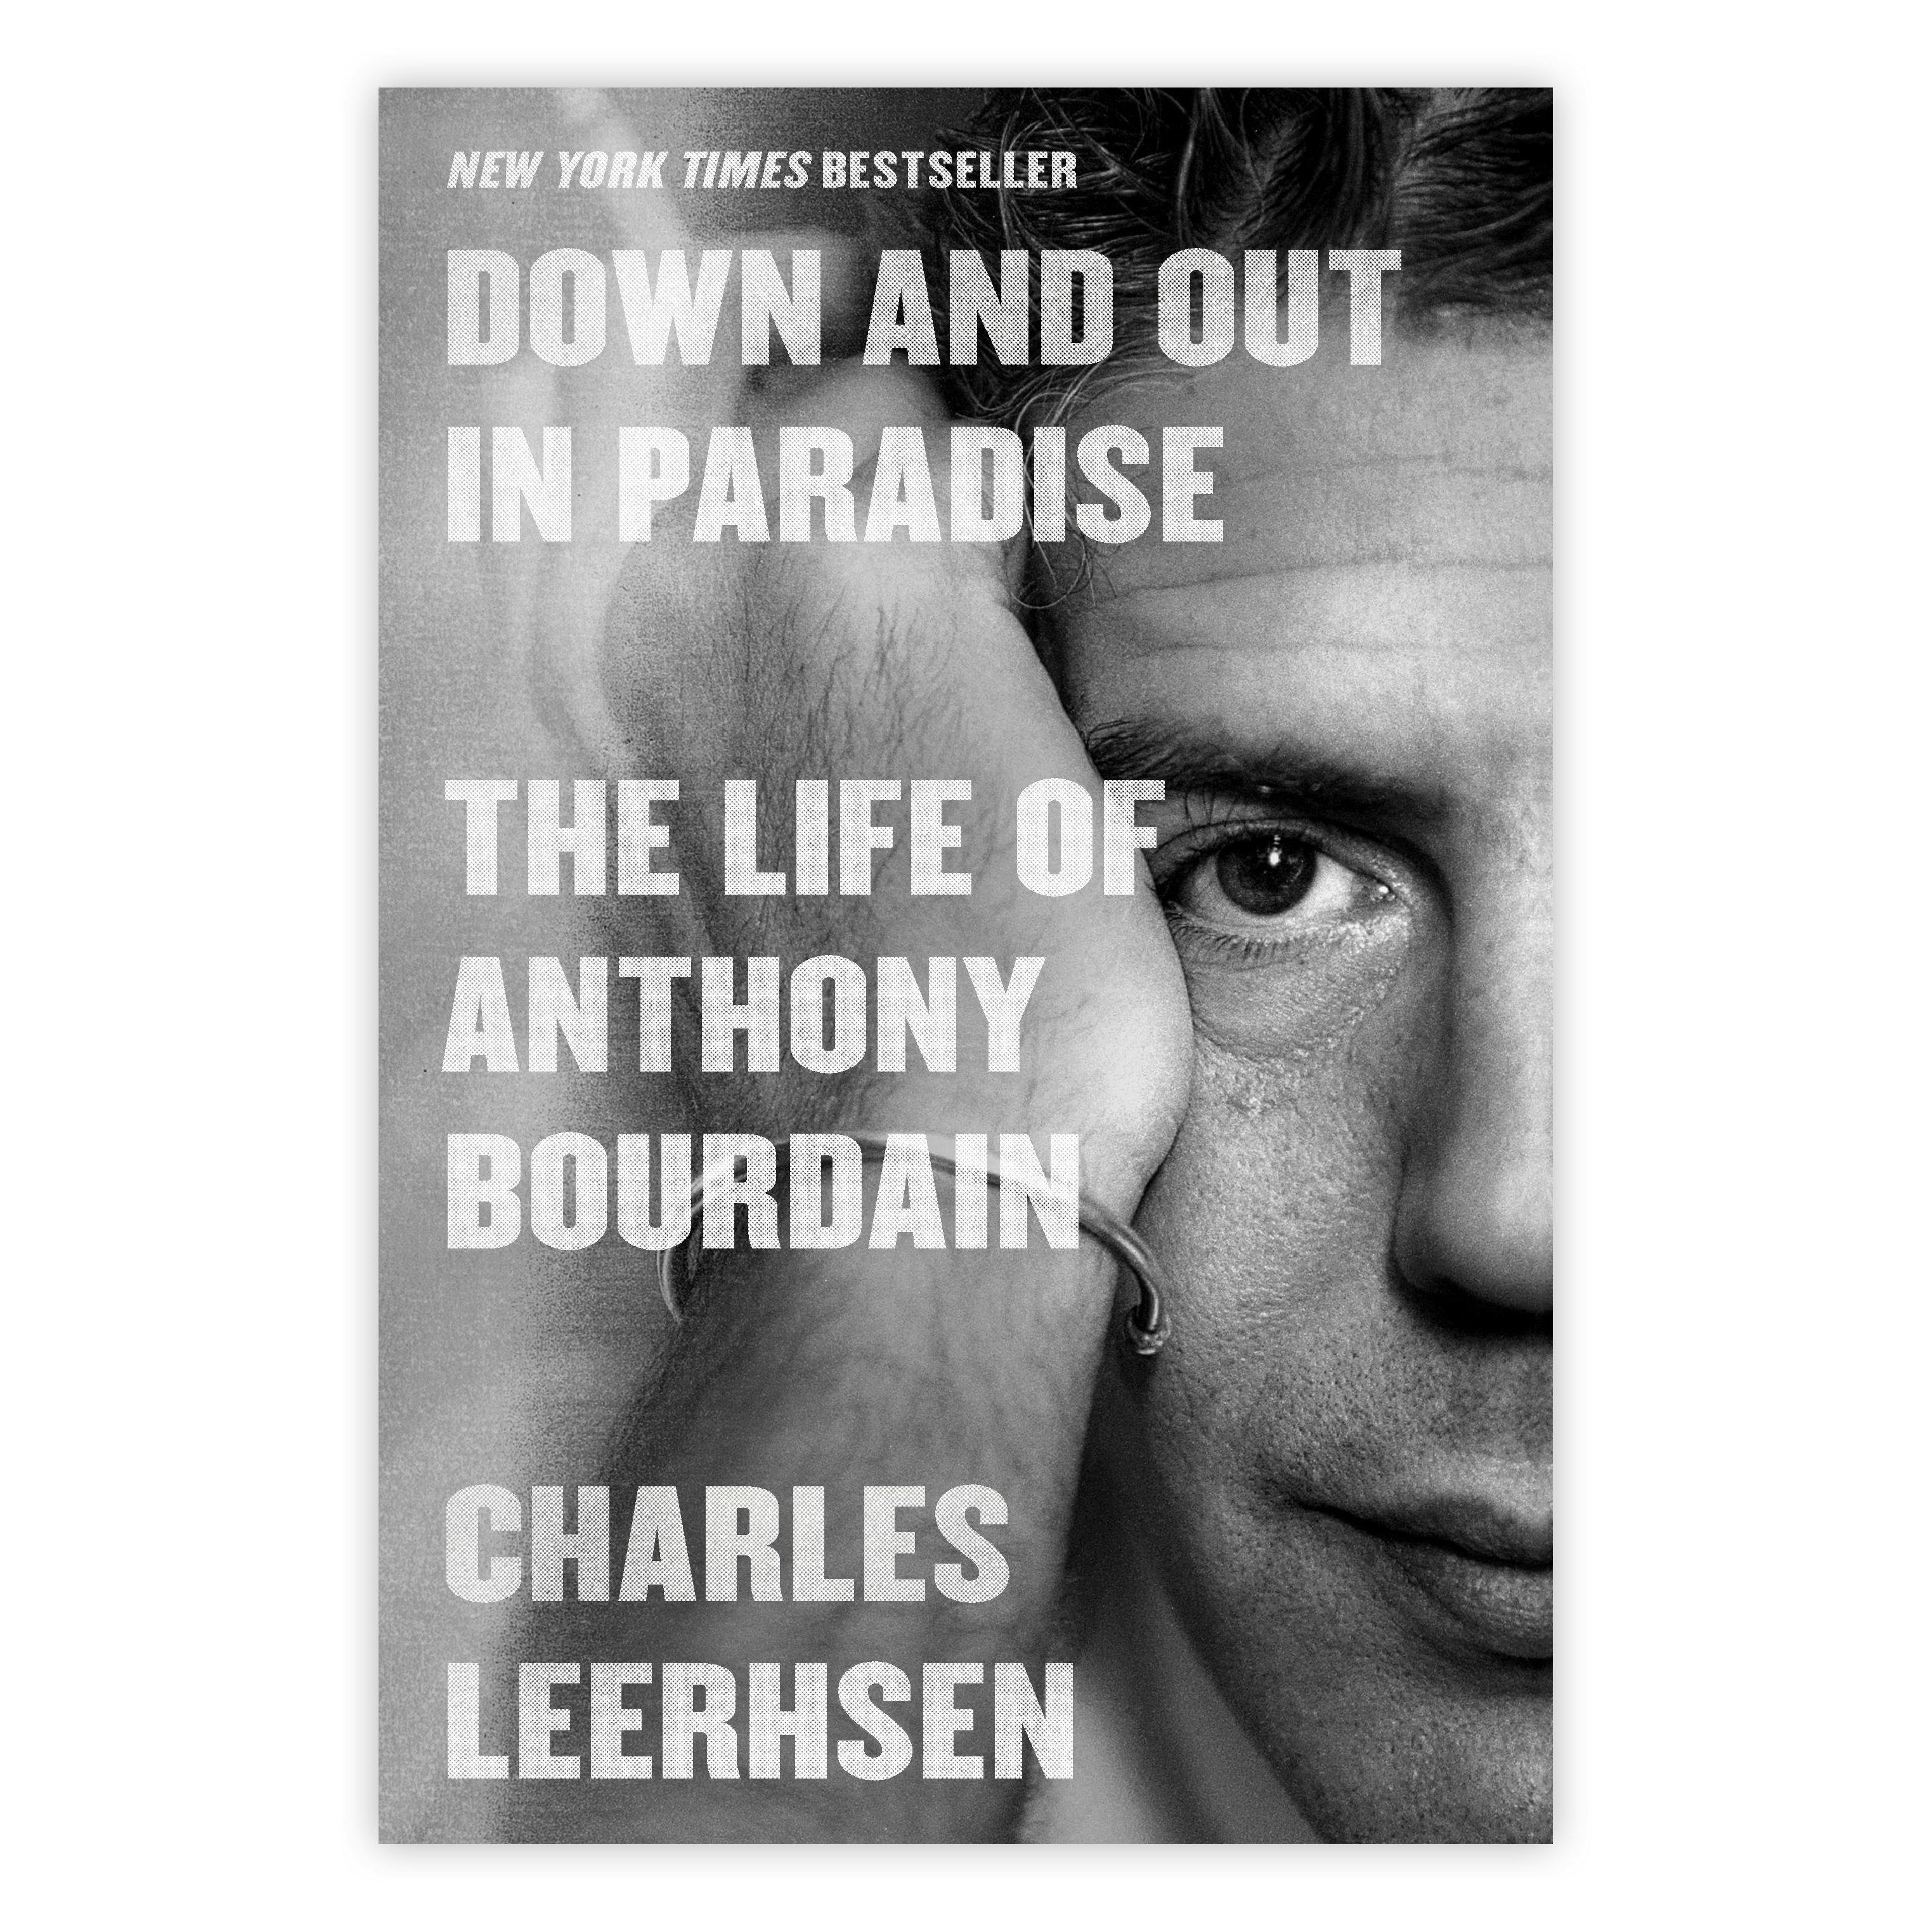 Down and Out in Paradise, The Life of Anthony Bourdain Book